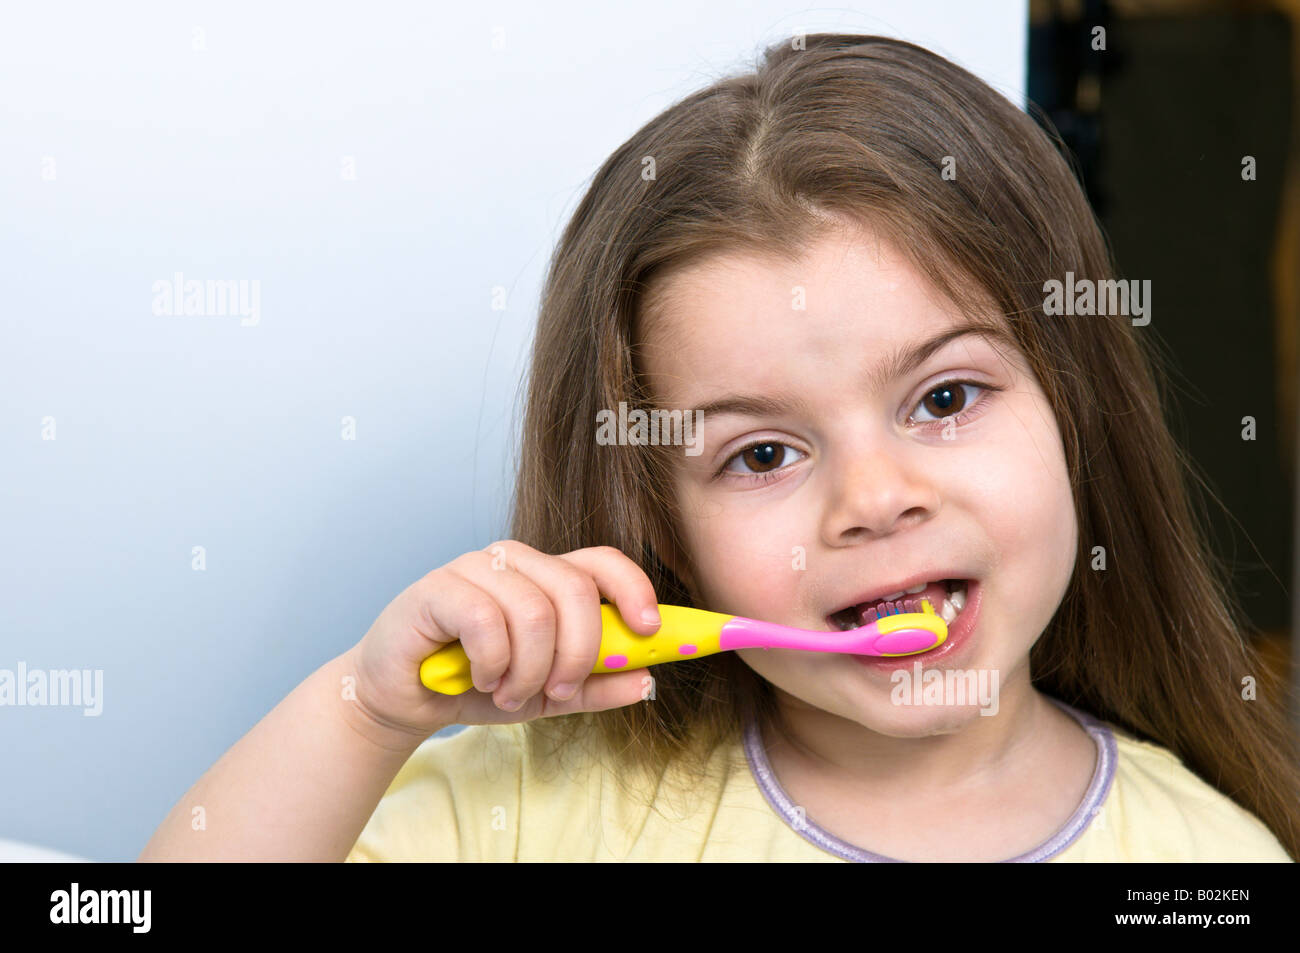 A young girl 4 years old with long brown hair brushes her teeth with a brightly colored pink and yellow child s toothbrush. Stock Photo